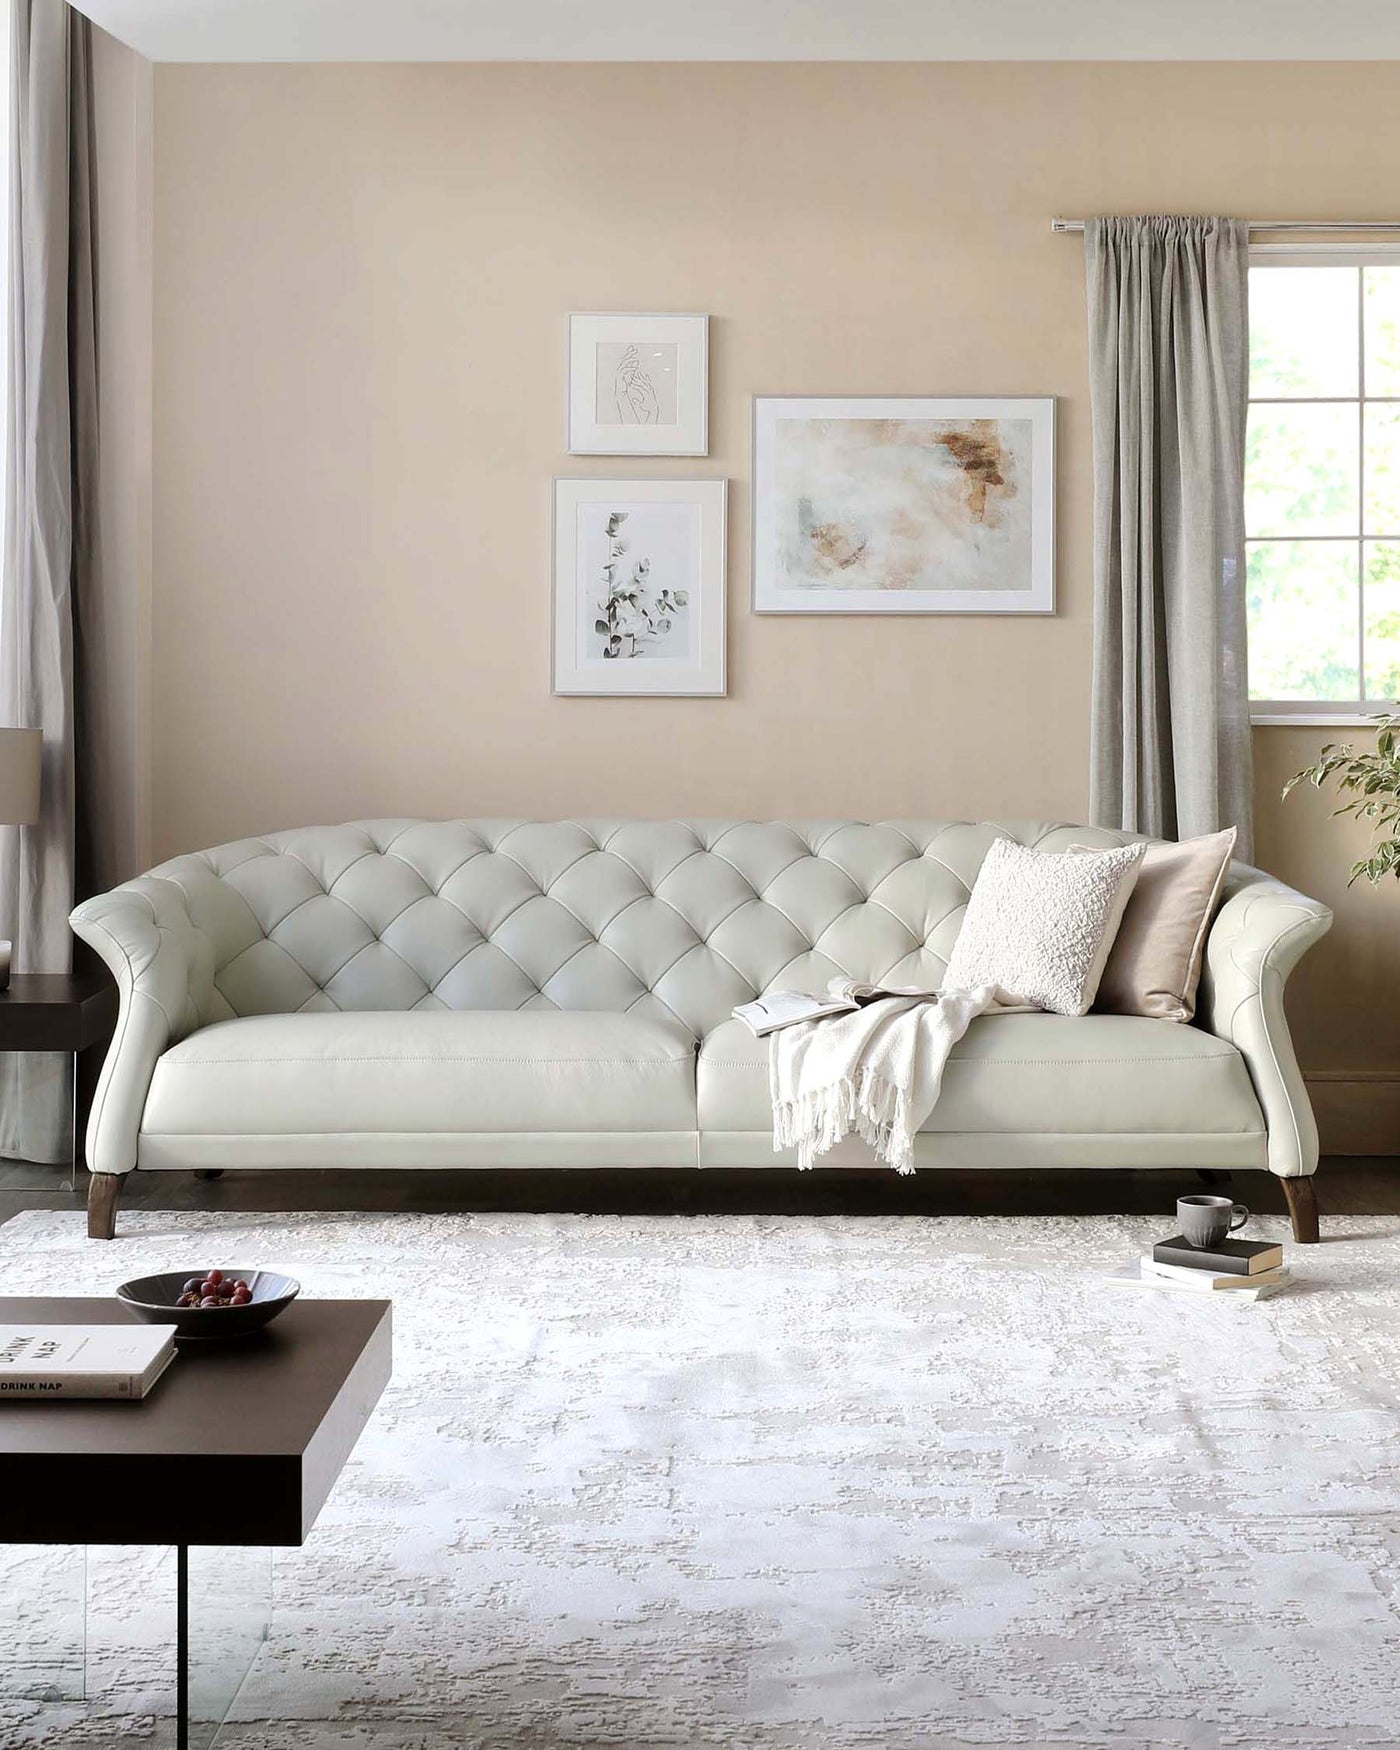 Elegant traditional tufted back cream sofa with curved armrests and dark wooden legs, accompanied by a modern square coffee table with a black top and thin metal legs, set on a distressed white patterned area rug.